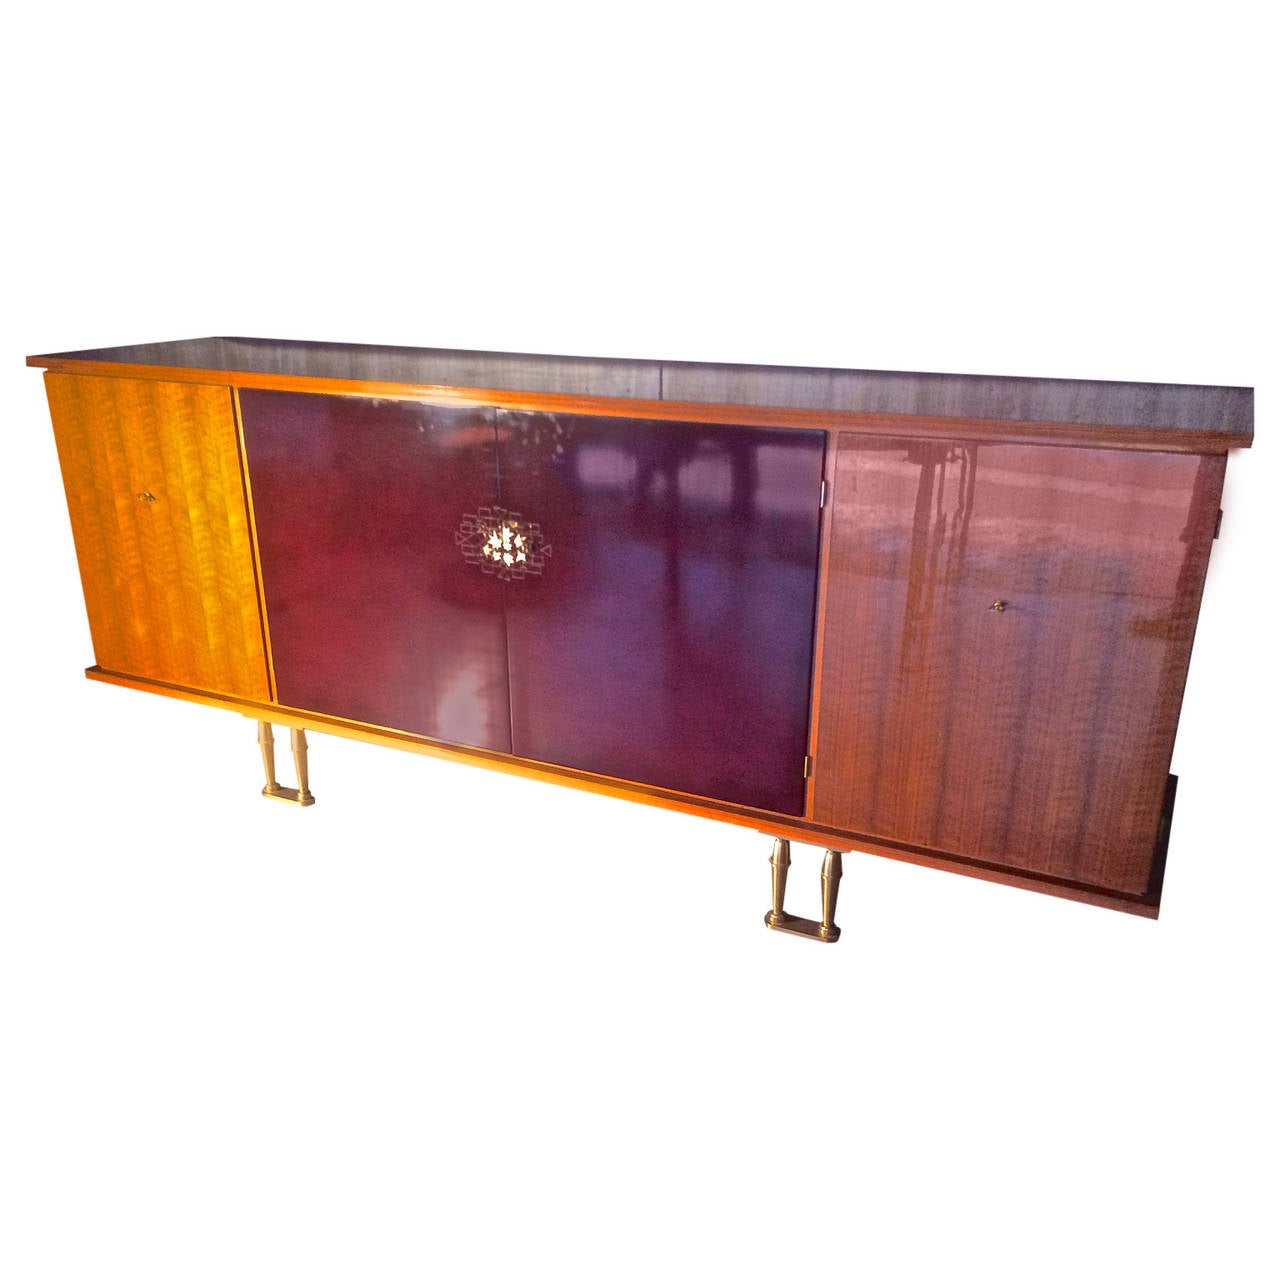 Jules Leleu documented 1950s four doors with red lacquer by Sain et Tambute
with sycamore inside including a bar and a full drawers for cutlery.
We offer a matching extendable round dining table with leaves on our site.